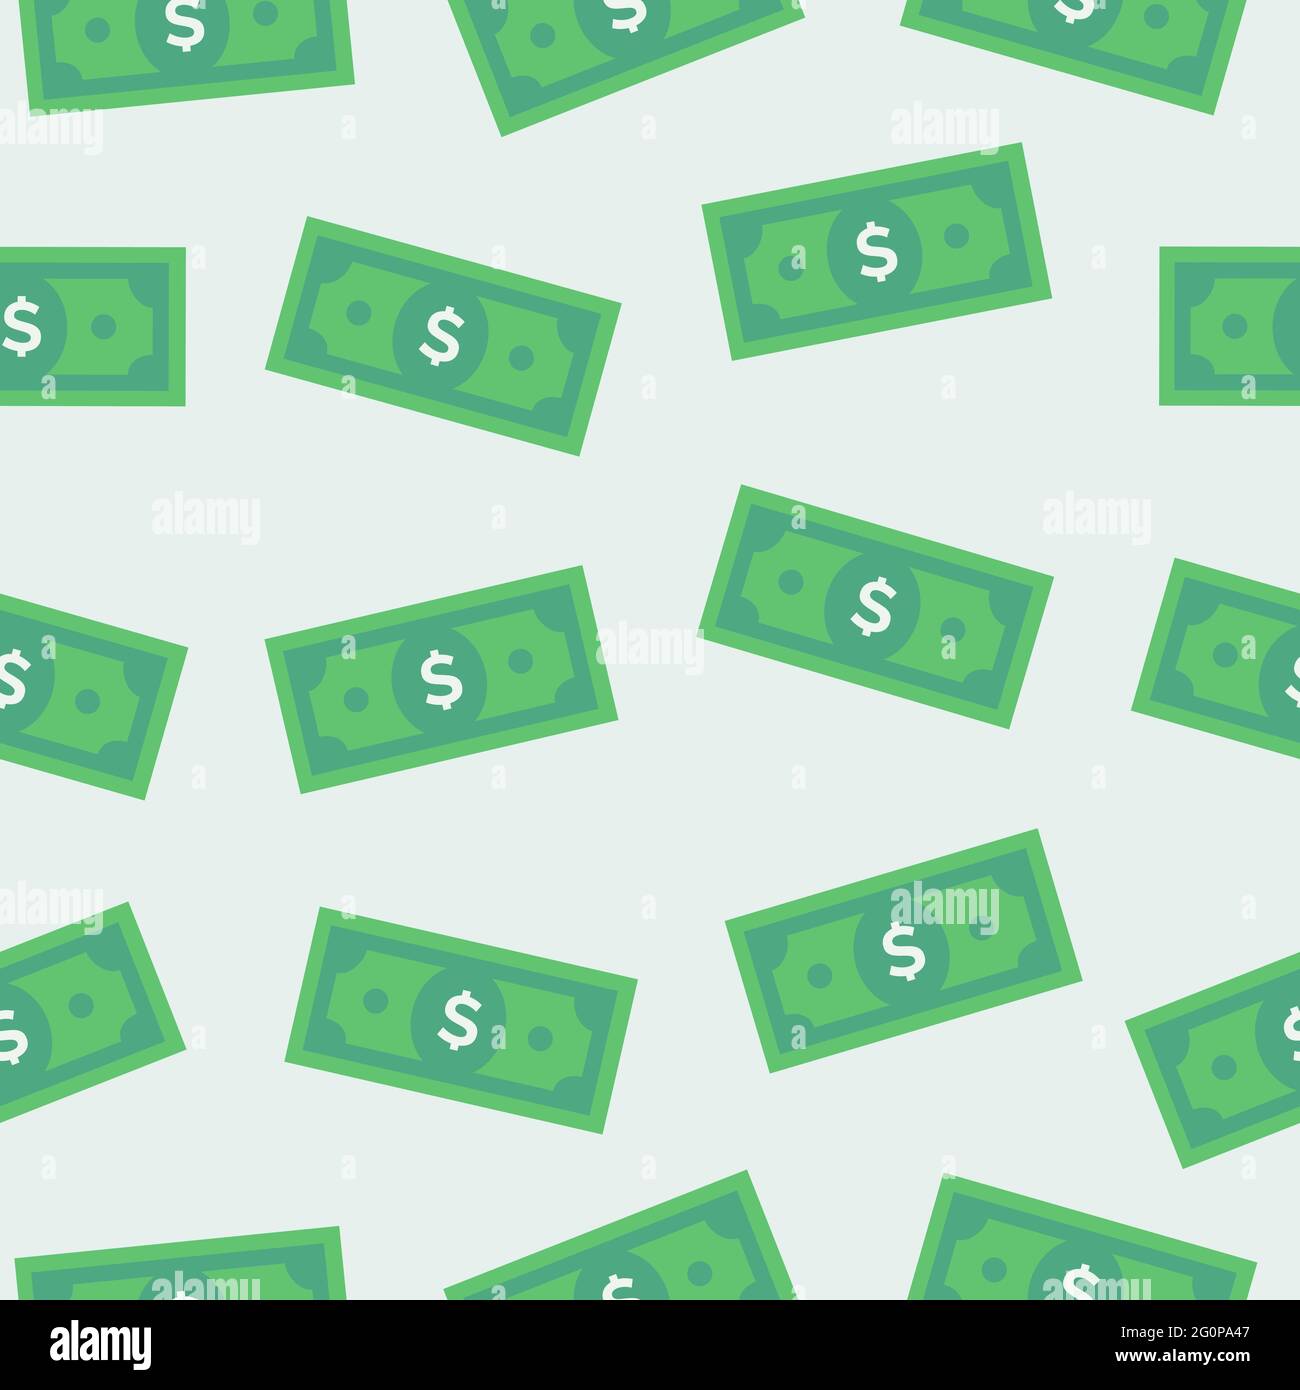 Money - Seamless Pattern with American Dollar Bills on White Background. Stock Vector